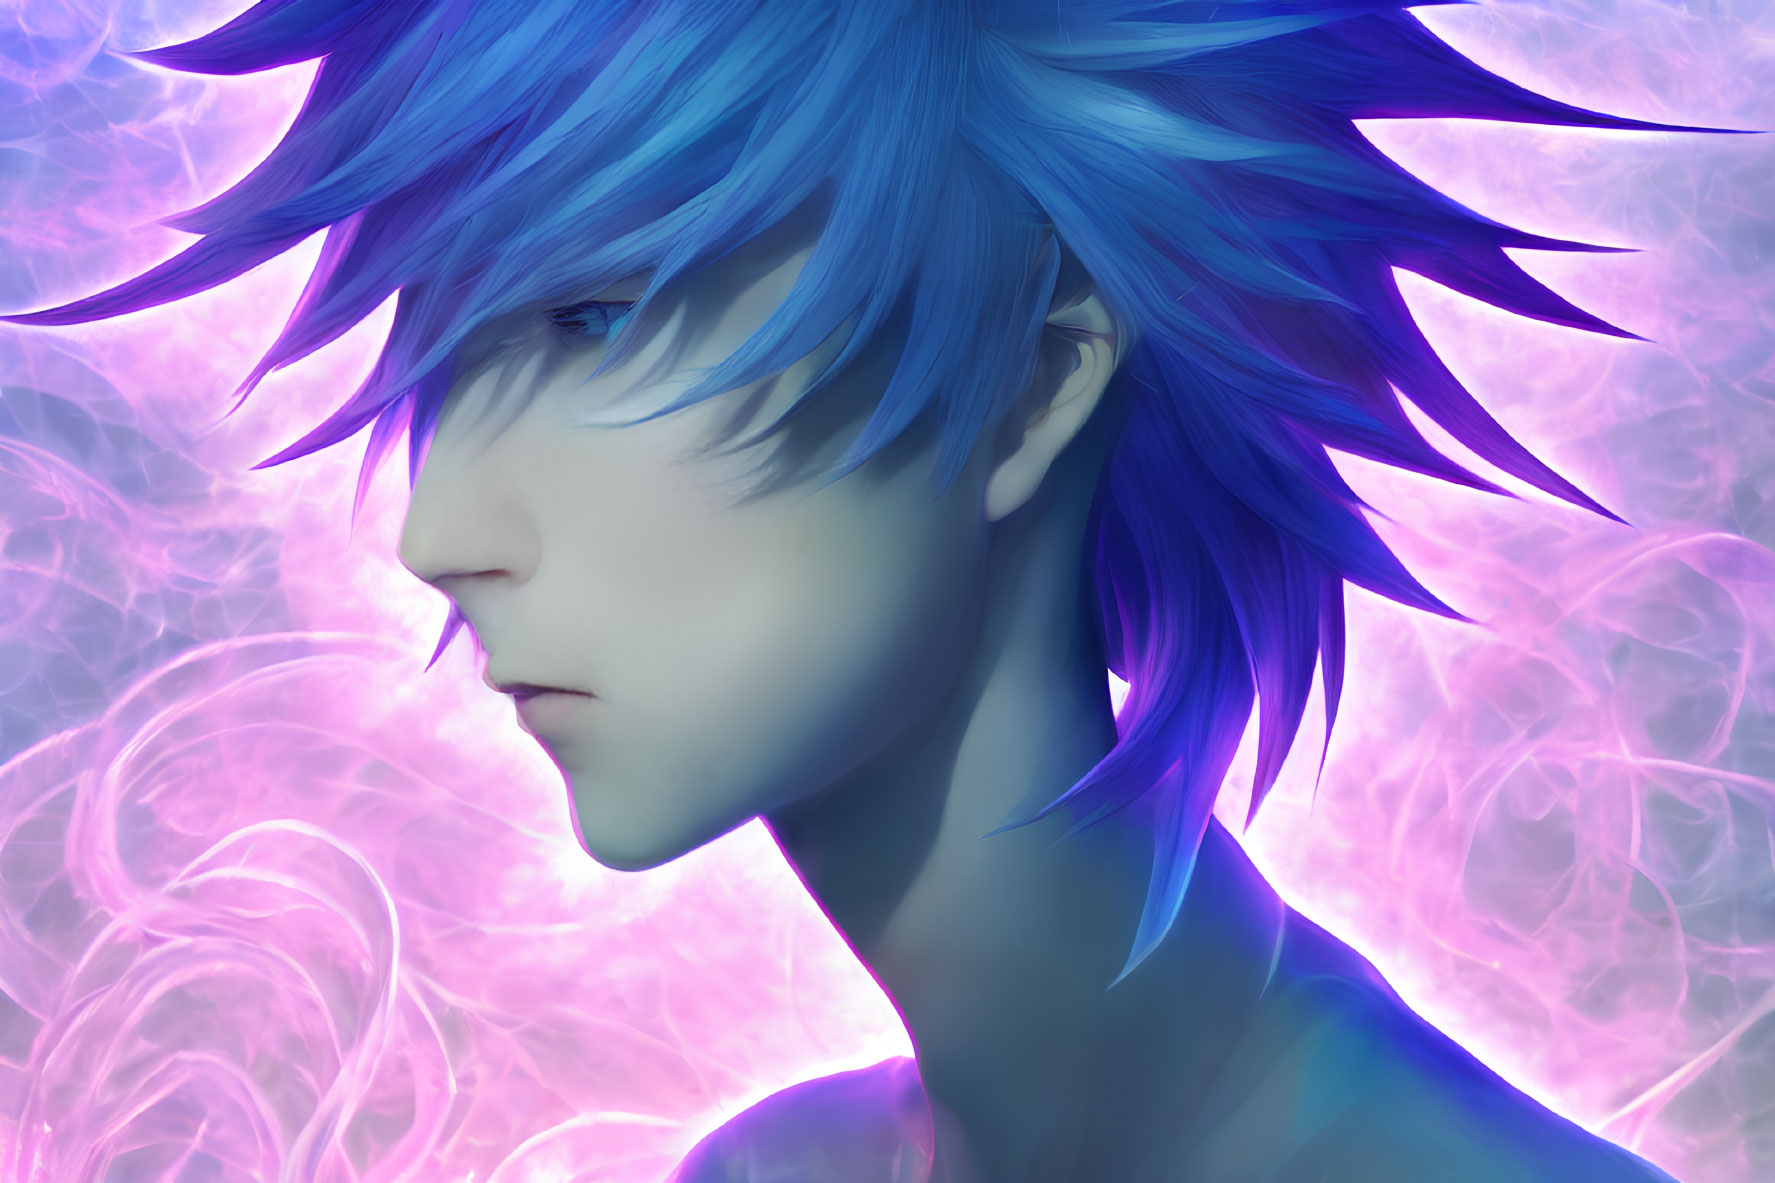 Illustrated character with spiky blue hair in solemn expression against swirling purple backdrop